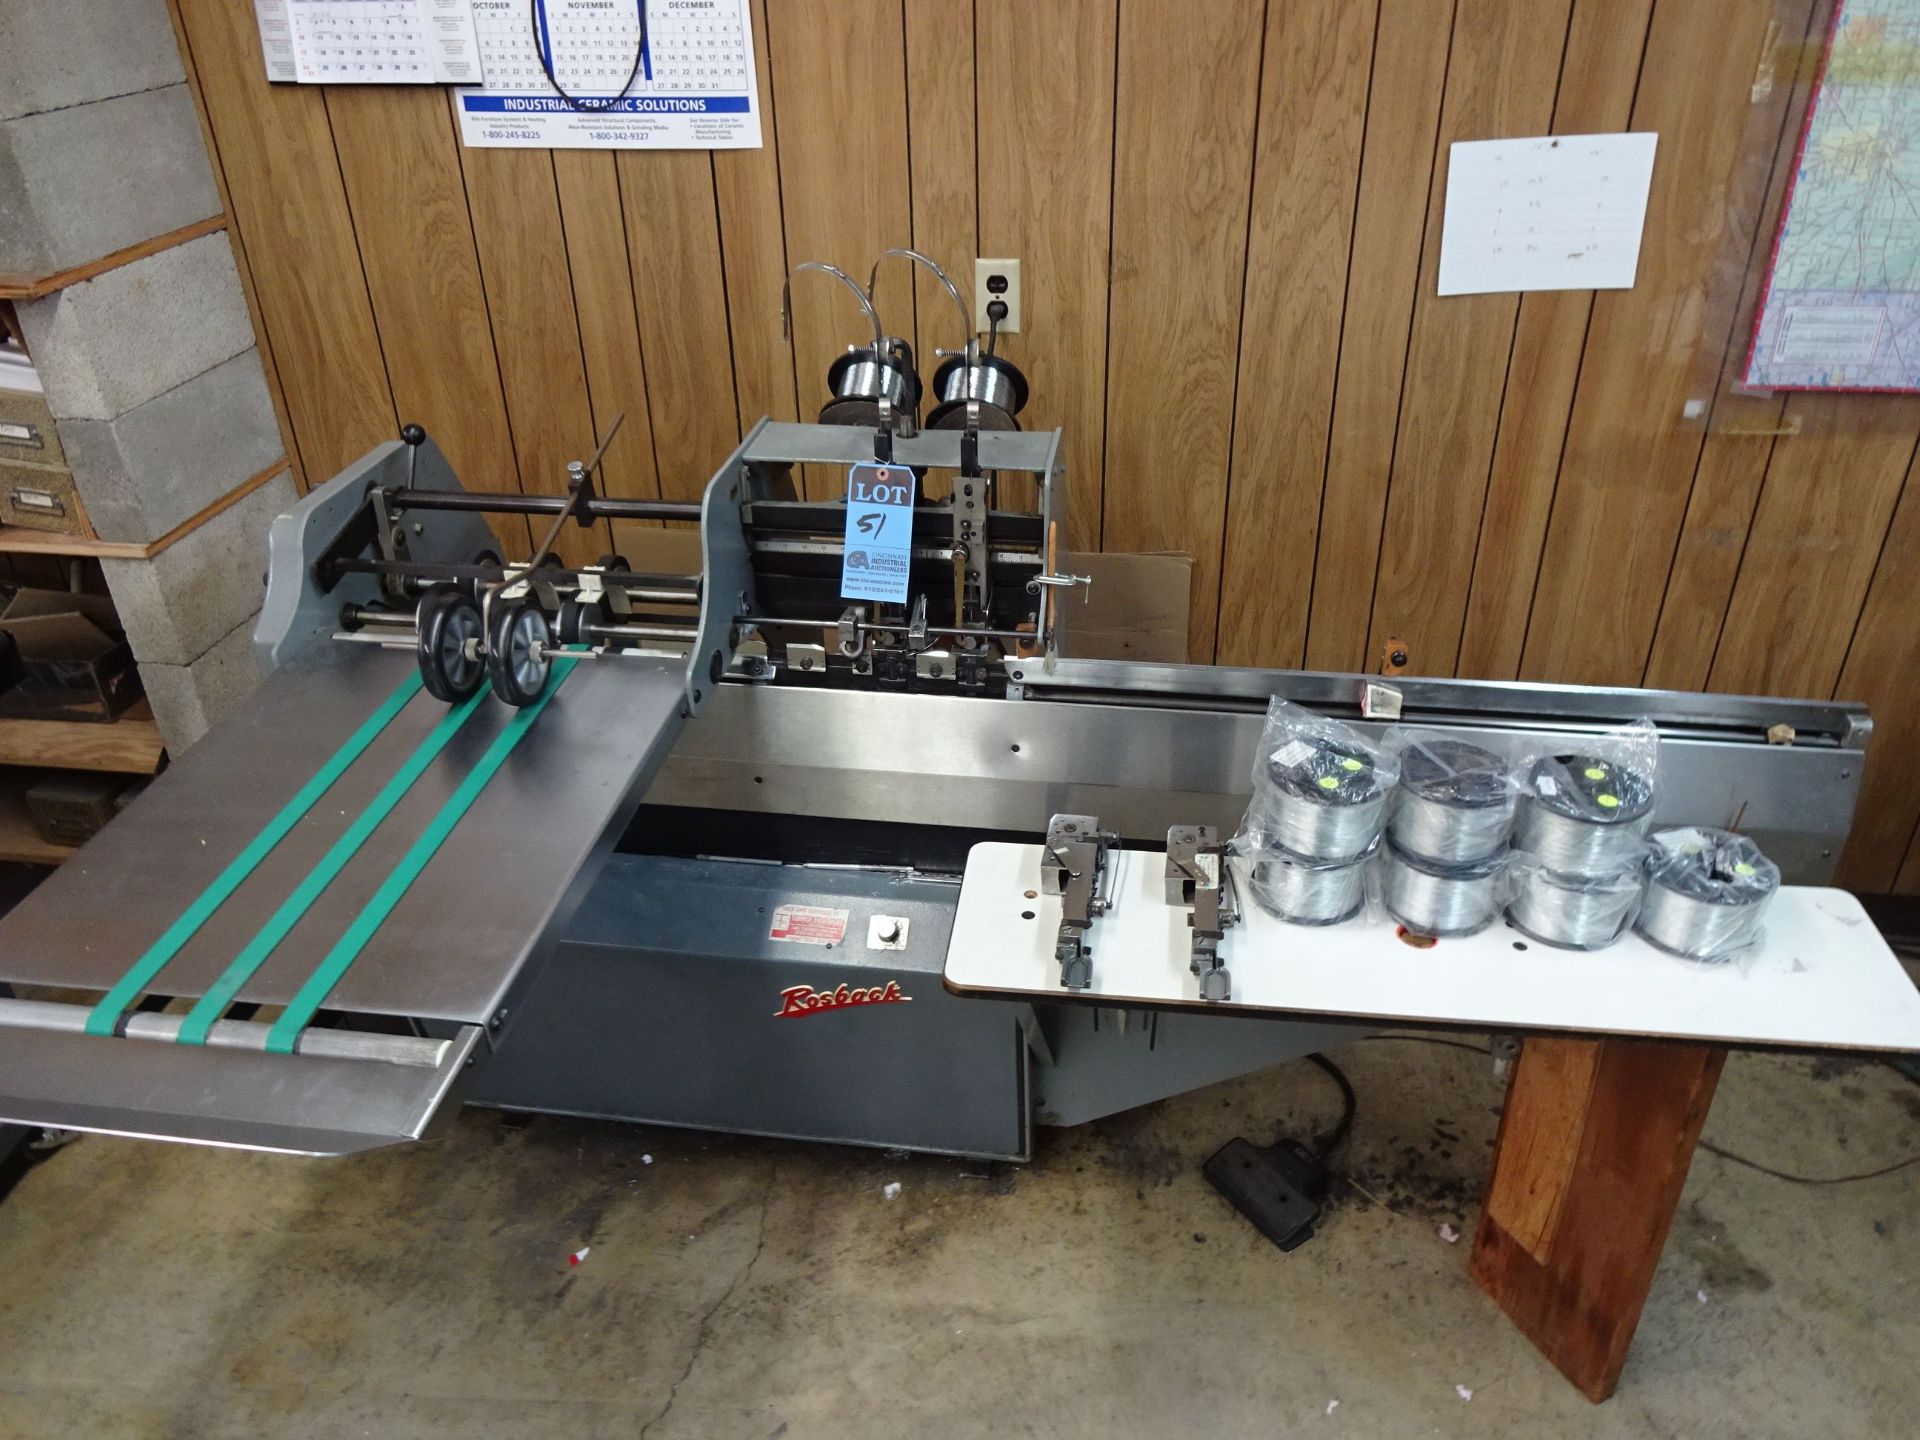 ROSBACK 2-HEAD MODEL 201 STITCHER; S/N 20175485, WITH (2) EXTRA STITCHING HEADS - $150.00 LOADING